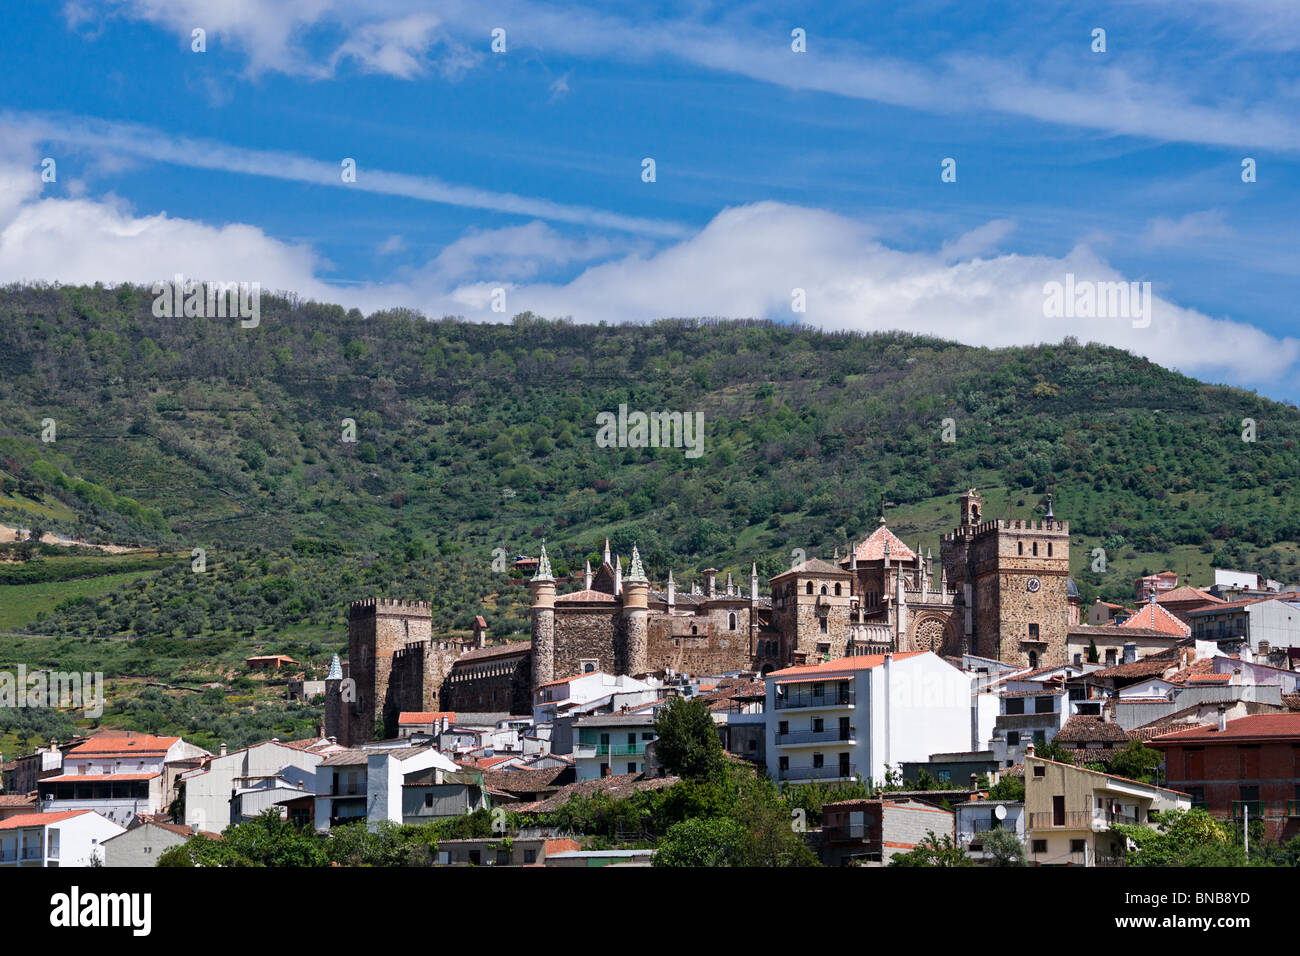 Royal Monastery of Santa Maria de Guadalupe and town of Guadalupe in Spain Stock Photo